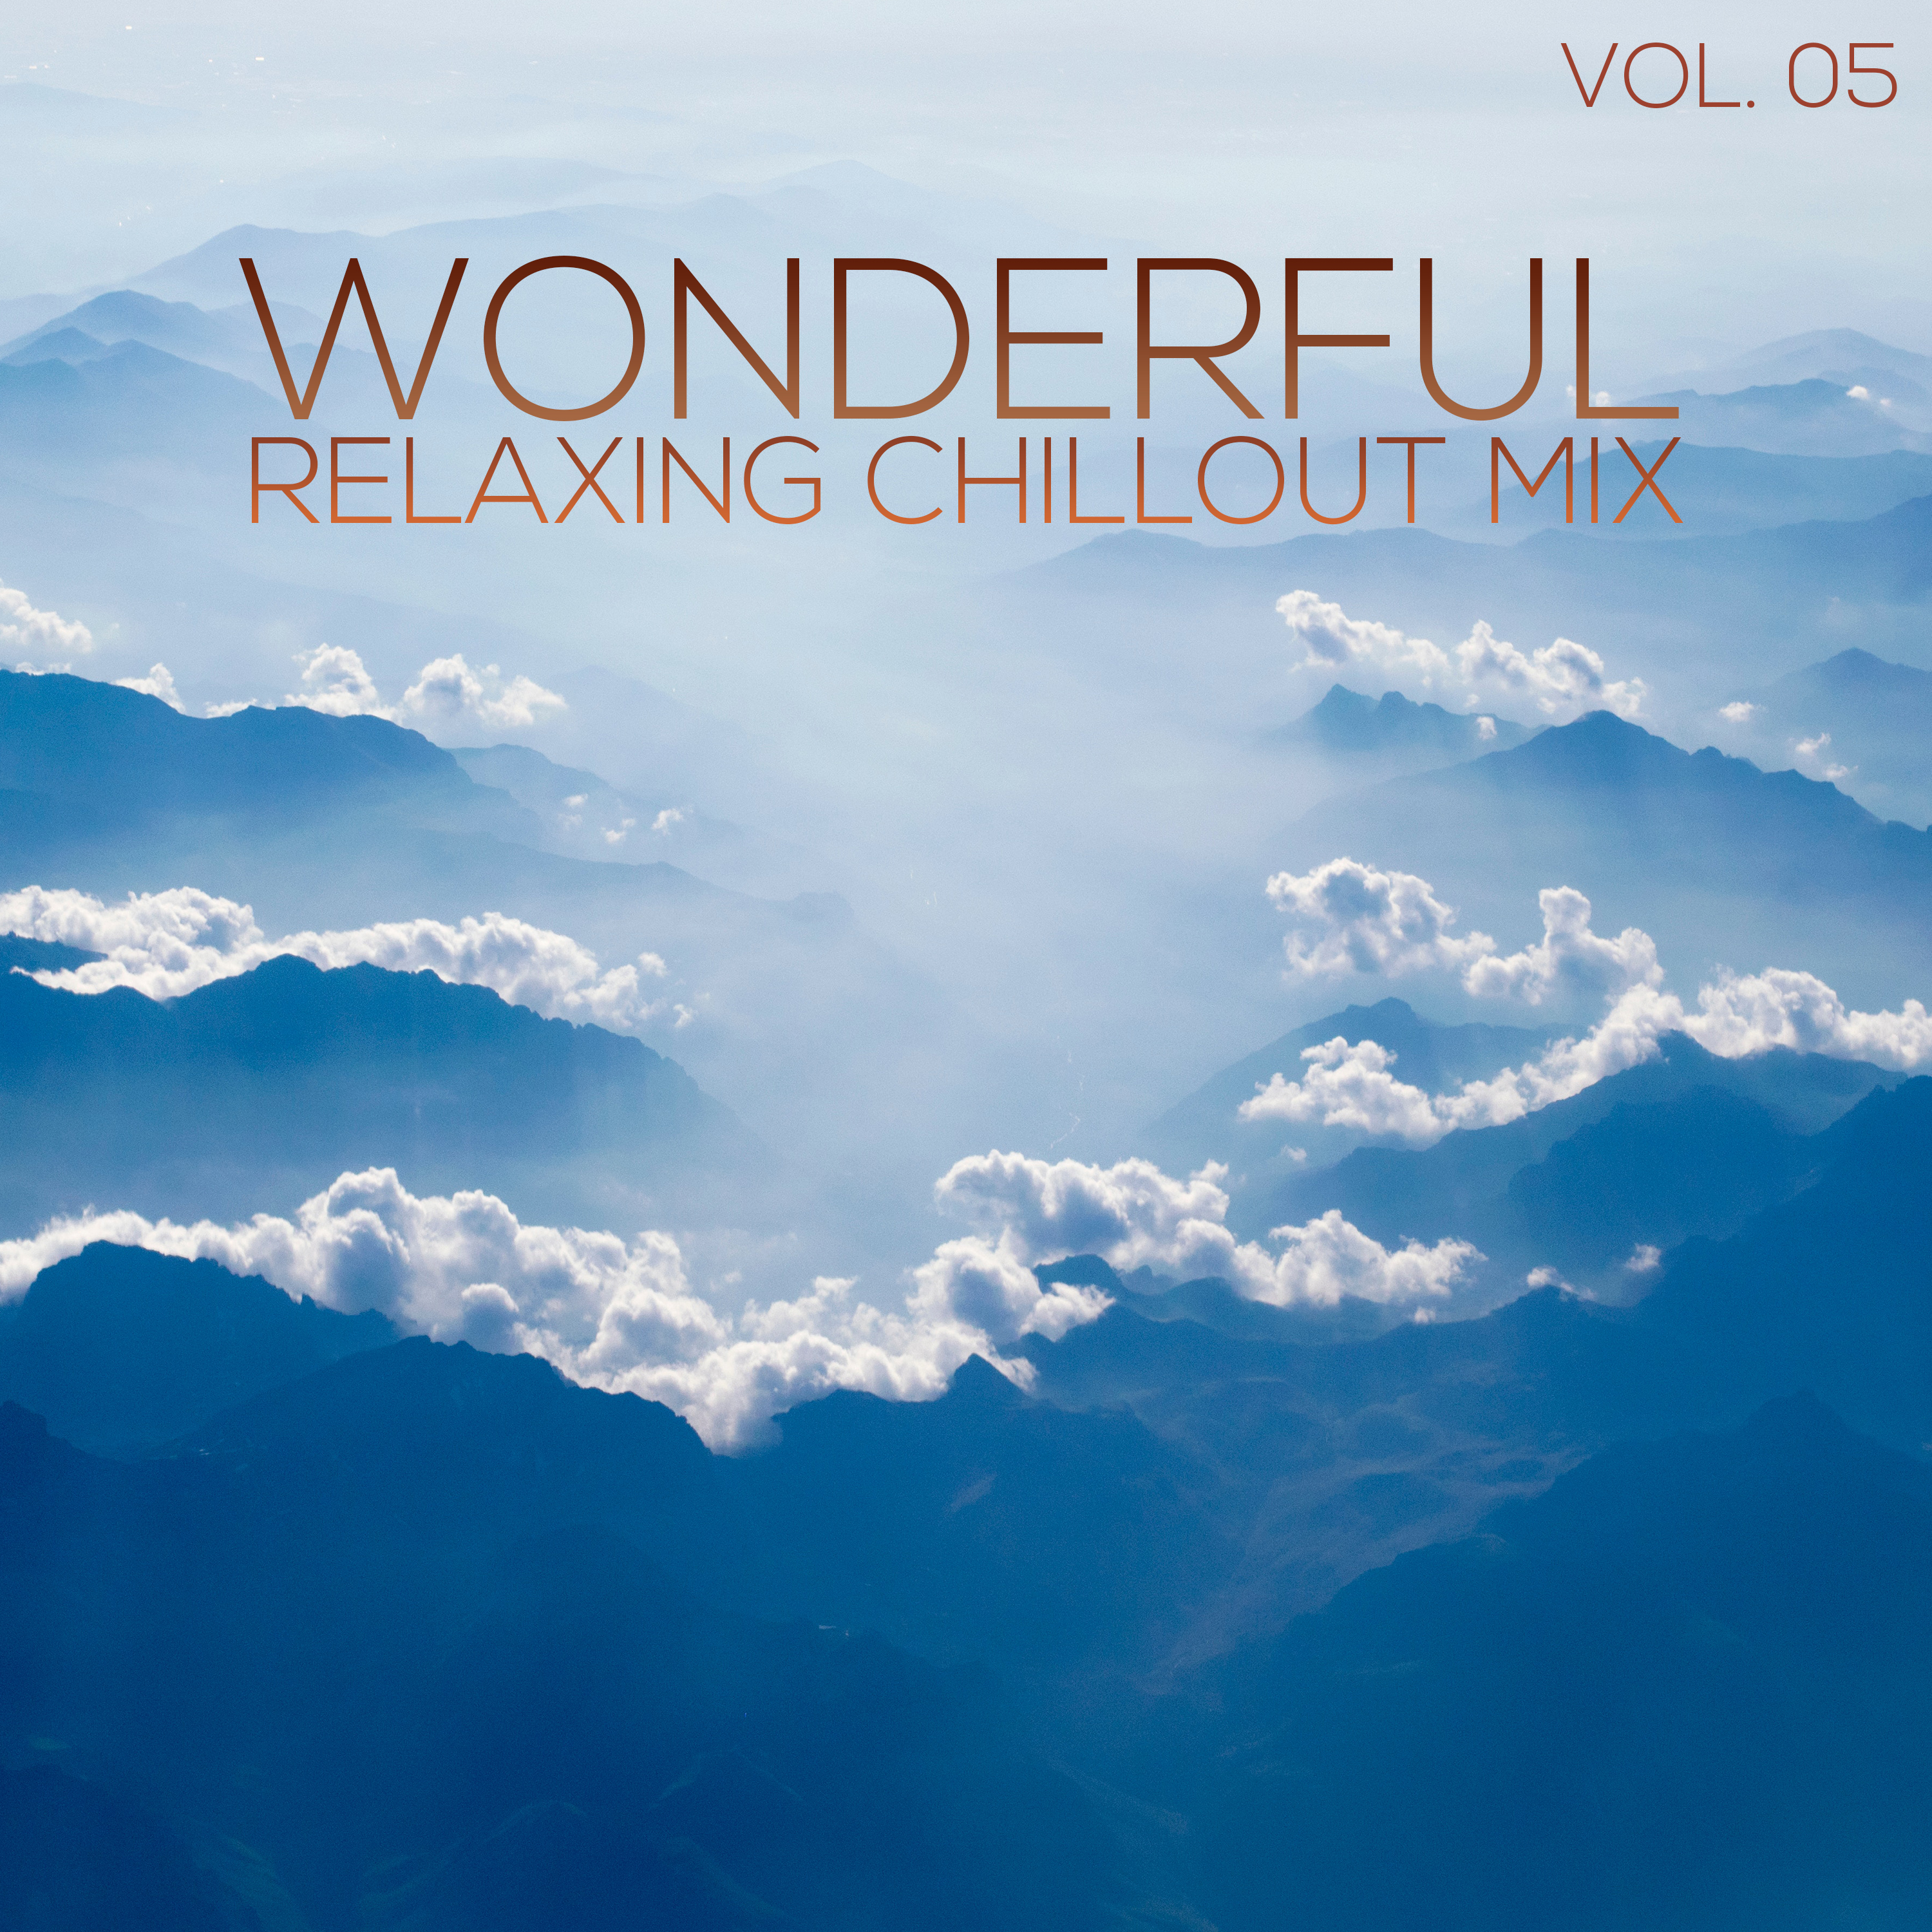 Wonderful Chillout Relaxing Music Mix, Vol. 05 (Compiled and Mixed by Deep Dreamer)